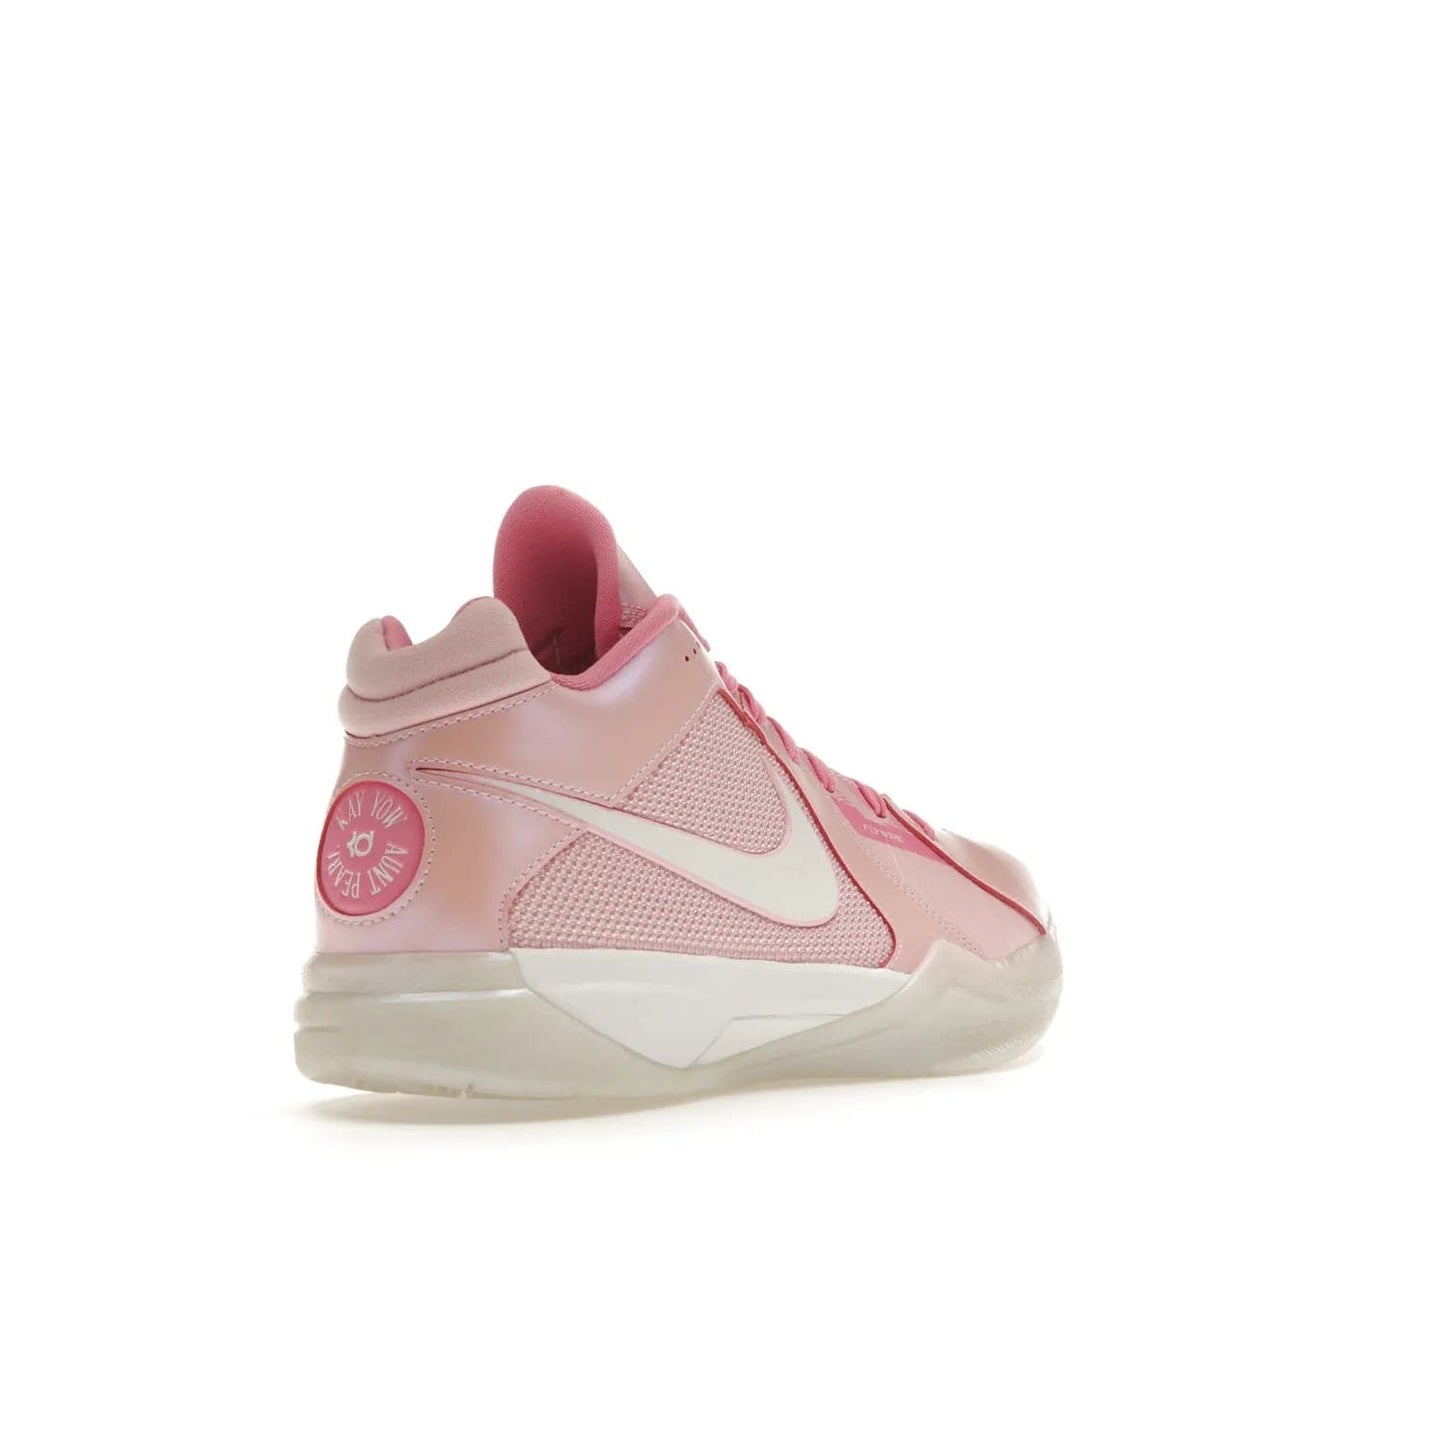 Nike KD 3 Aunt Pearl - Image 32 - Only at www.BallersClubKickz.com - Introducing the Nike KD 3 Aunt Pearl. Featuring a bold Medium Soft Pink, White, & Lotus Pink colorway. Get ready to stand out this October 15th.